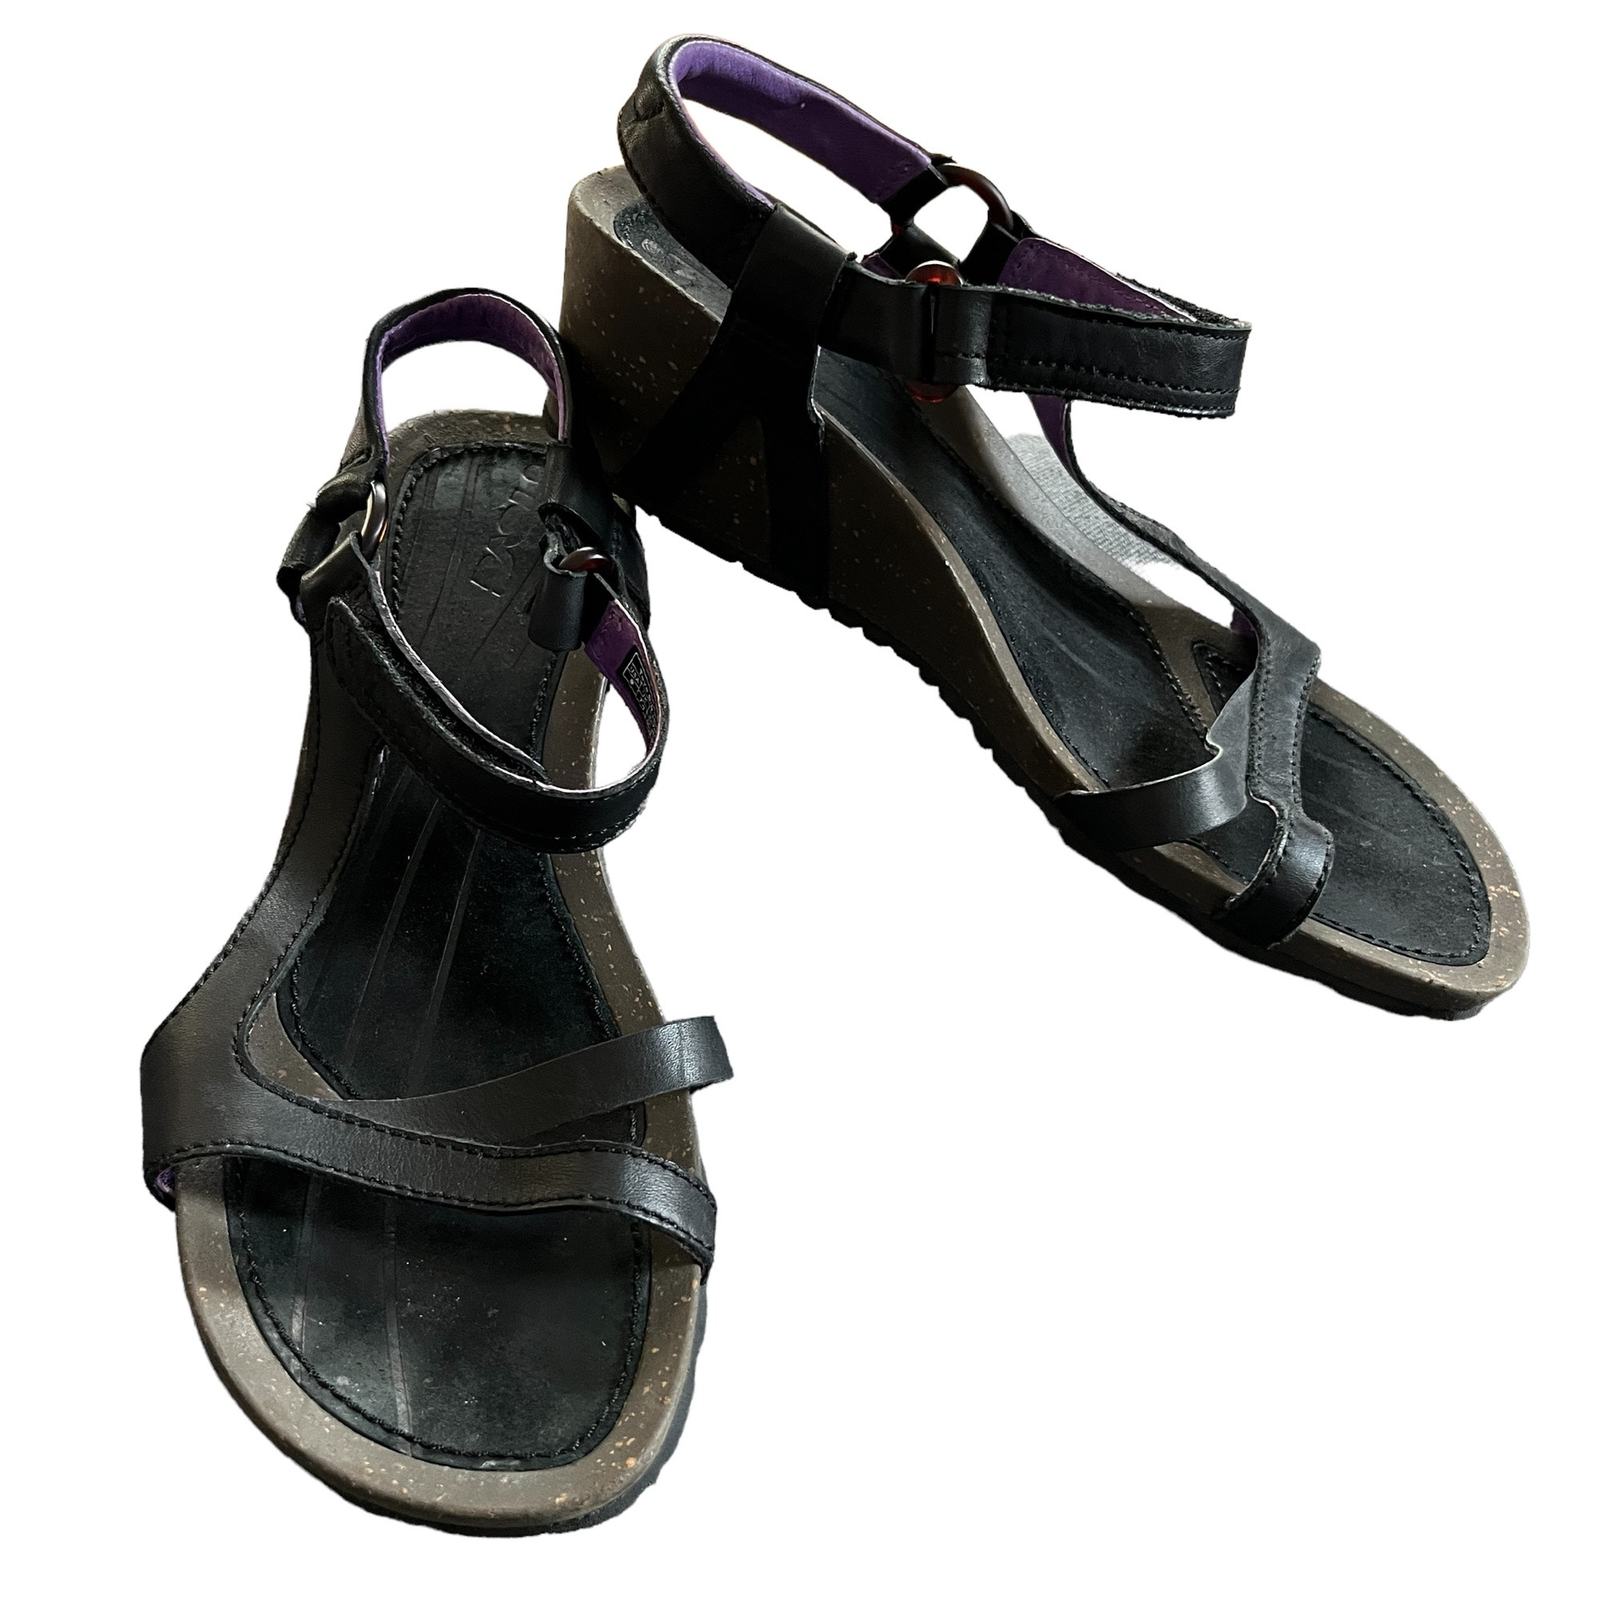 Primary image for Teva Cabrillo 9 Womens Black Leather Slingback Sandals 1002370